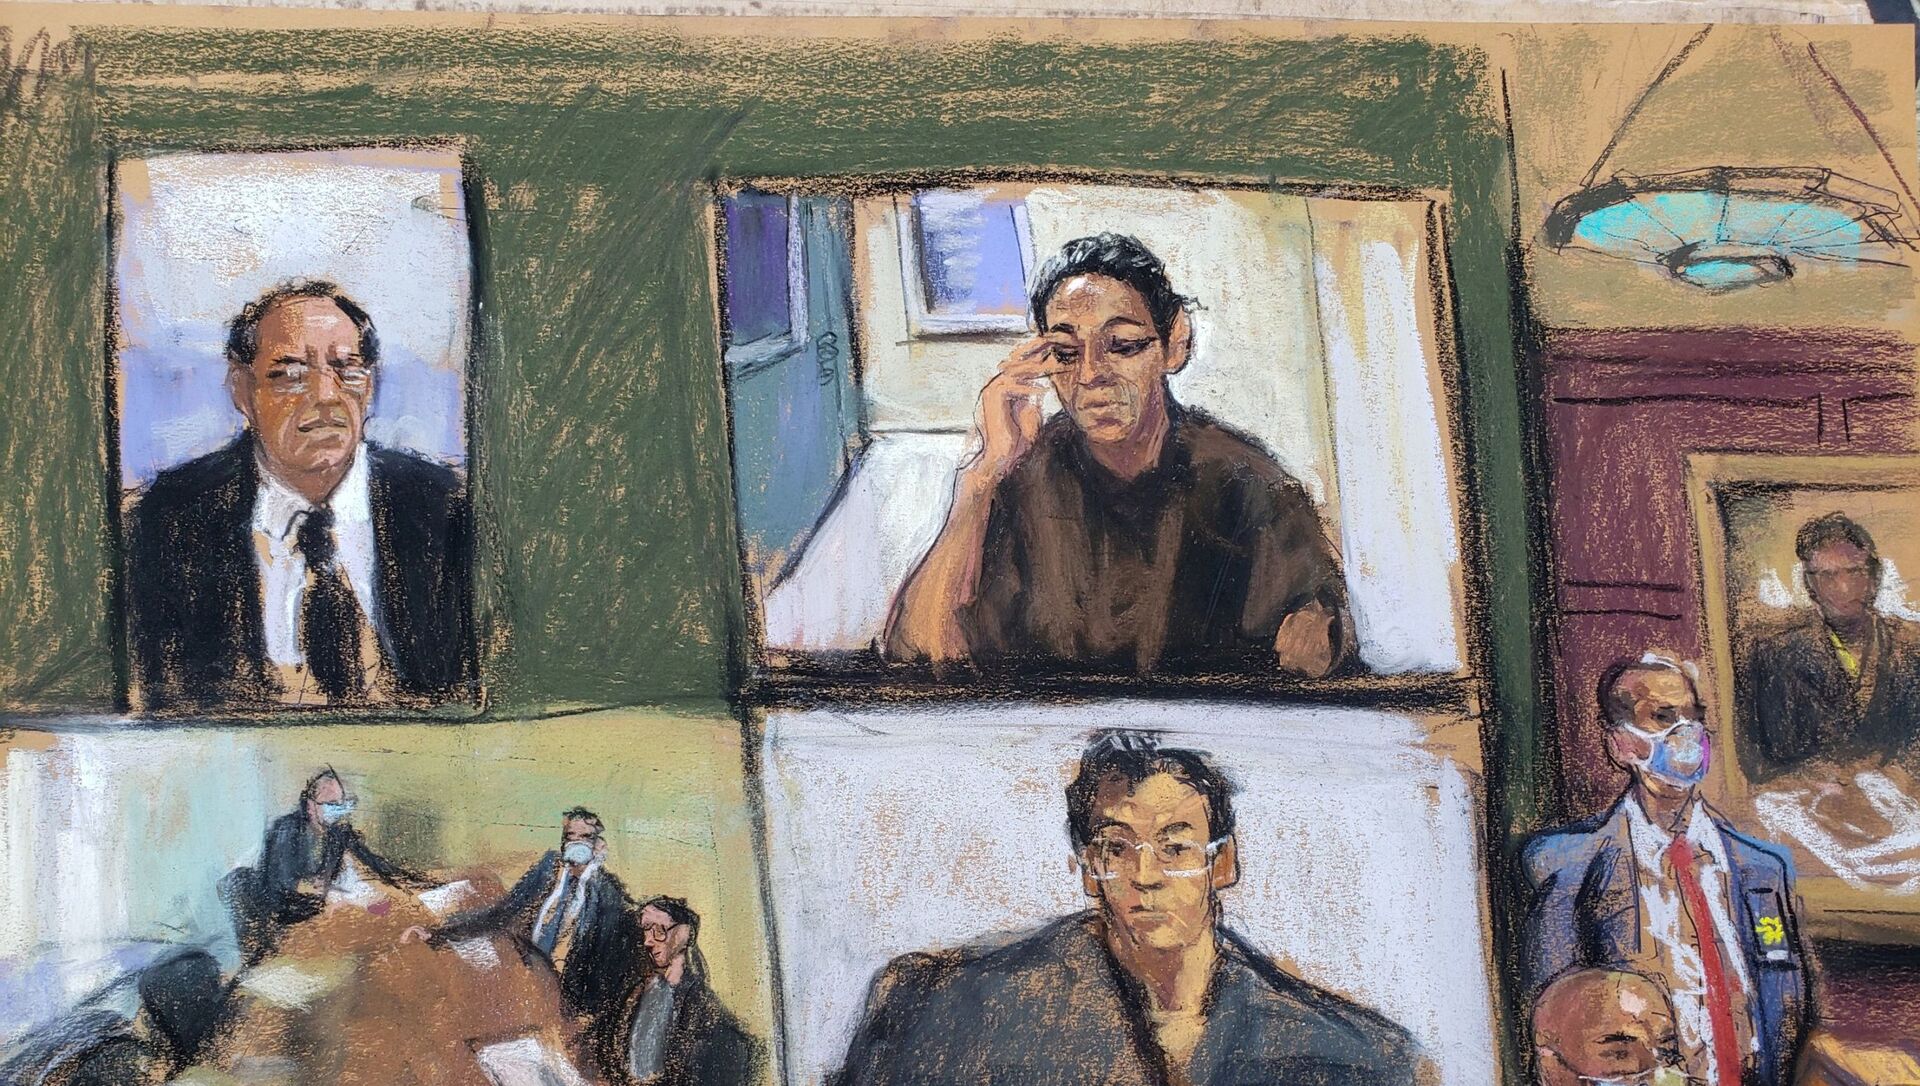 Ghislaine Maxwell appears via video link during her arraignment hearing where she was denied bail for her role aiding Jeffrey Epstein to recruit and eventually abuse of minor girls, in Manhattan Federal Court, in the Manhattan borough of New York City, New York, U.S. July 14, 2020 in this courtroom sketch - Sputnik International, 1920, 10.03.2021